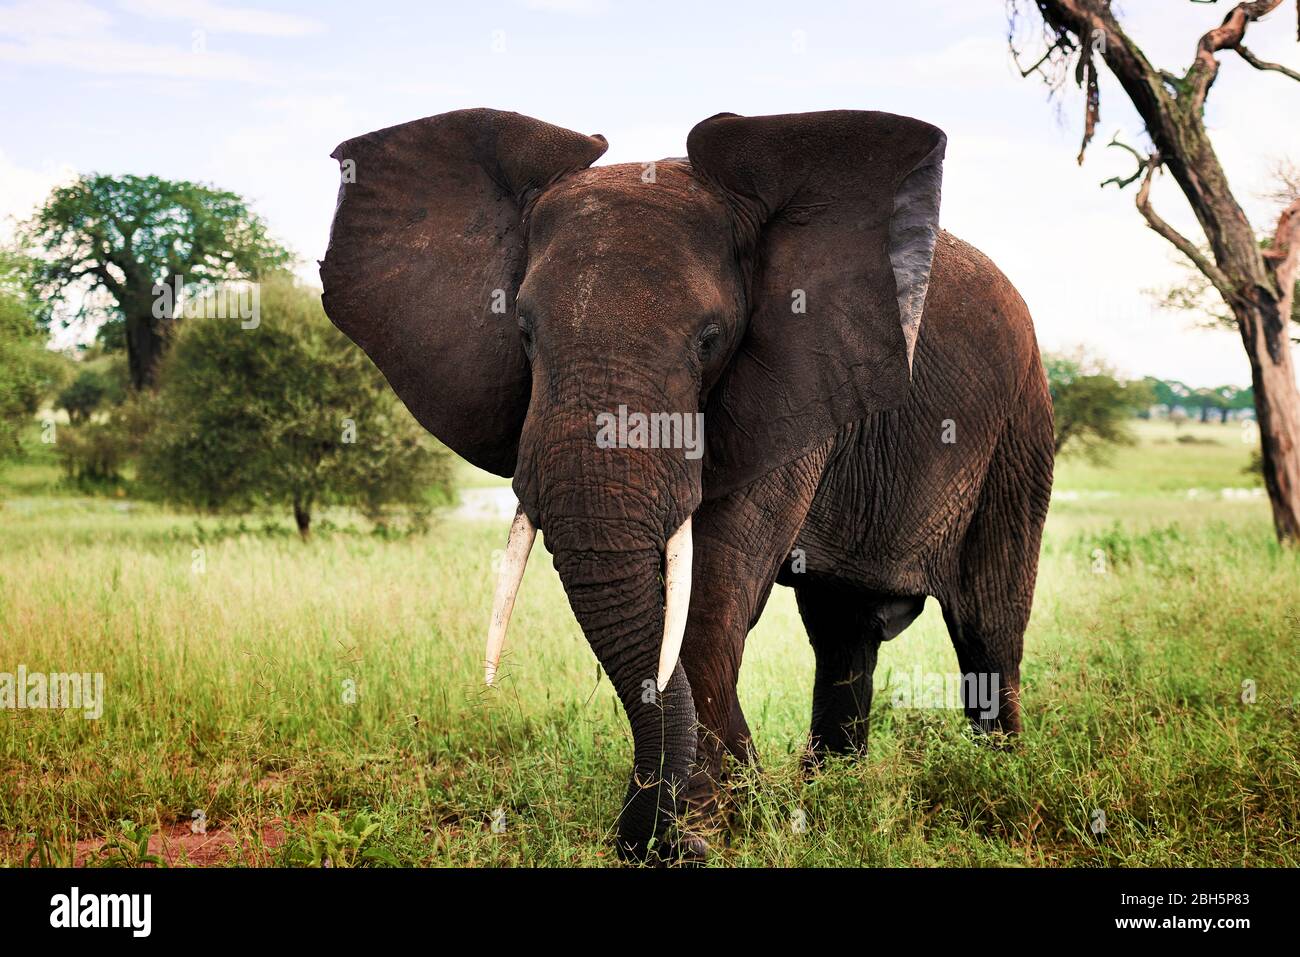 Shot of elephant in Africa Stock Photo